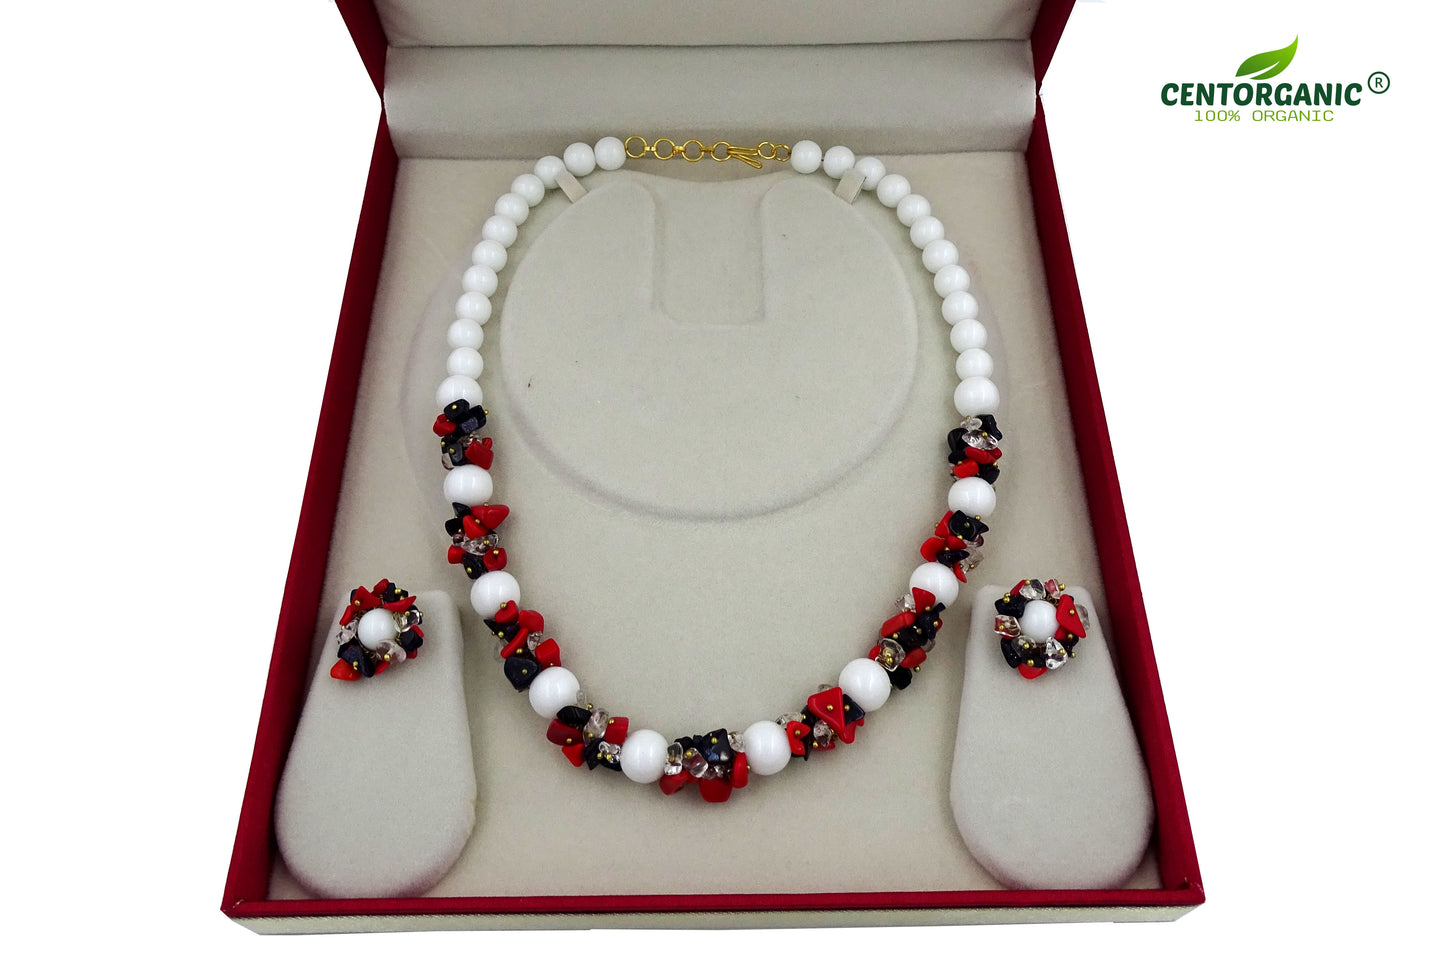 Centorganic - Semi Precious Gemstone Crystal Beads Necklace with Earring ,Red Jasper Stone chip, black Obsidian chip, clear quartz chip and white Jade length 16" Mala for Girl and Women Fashion Jewellery, with beautiful jewellery box for gifting.